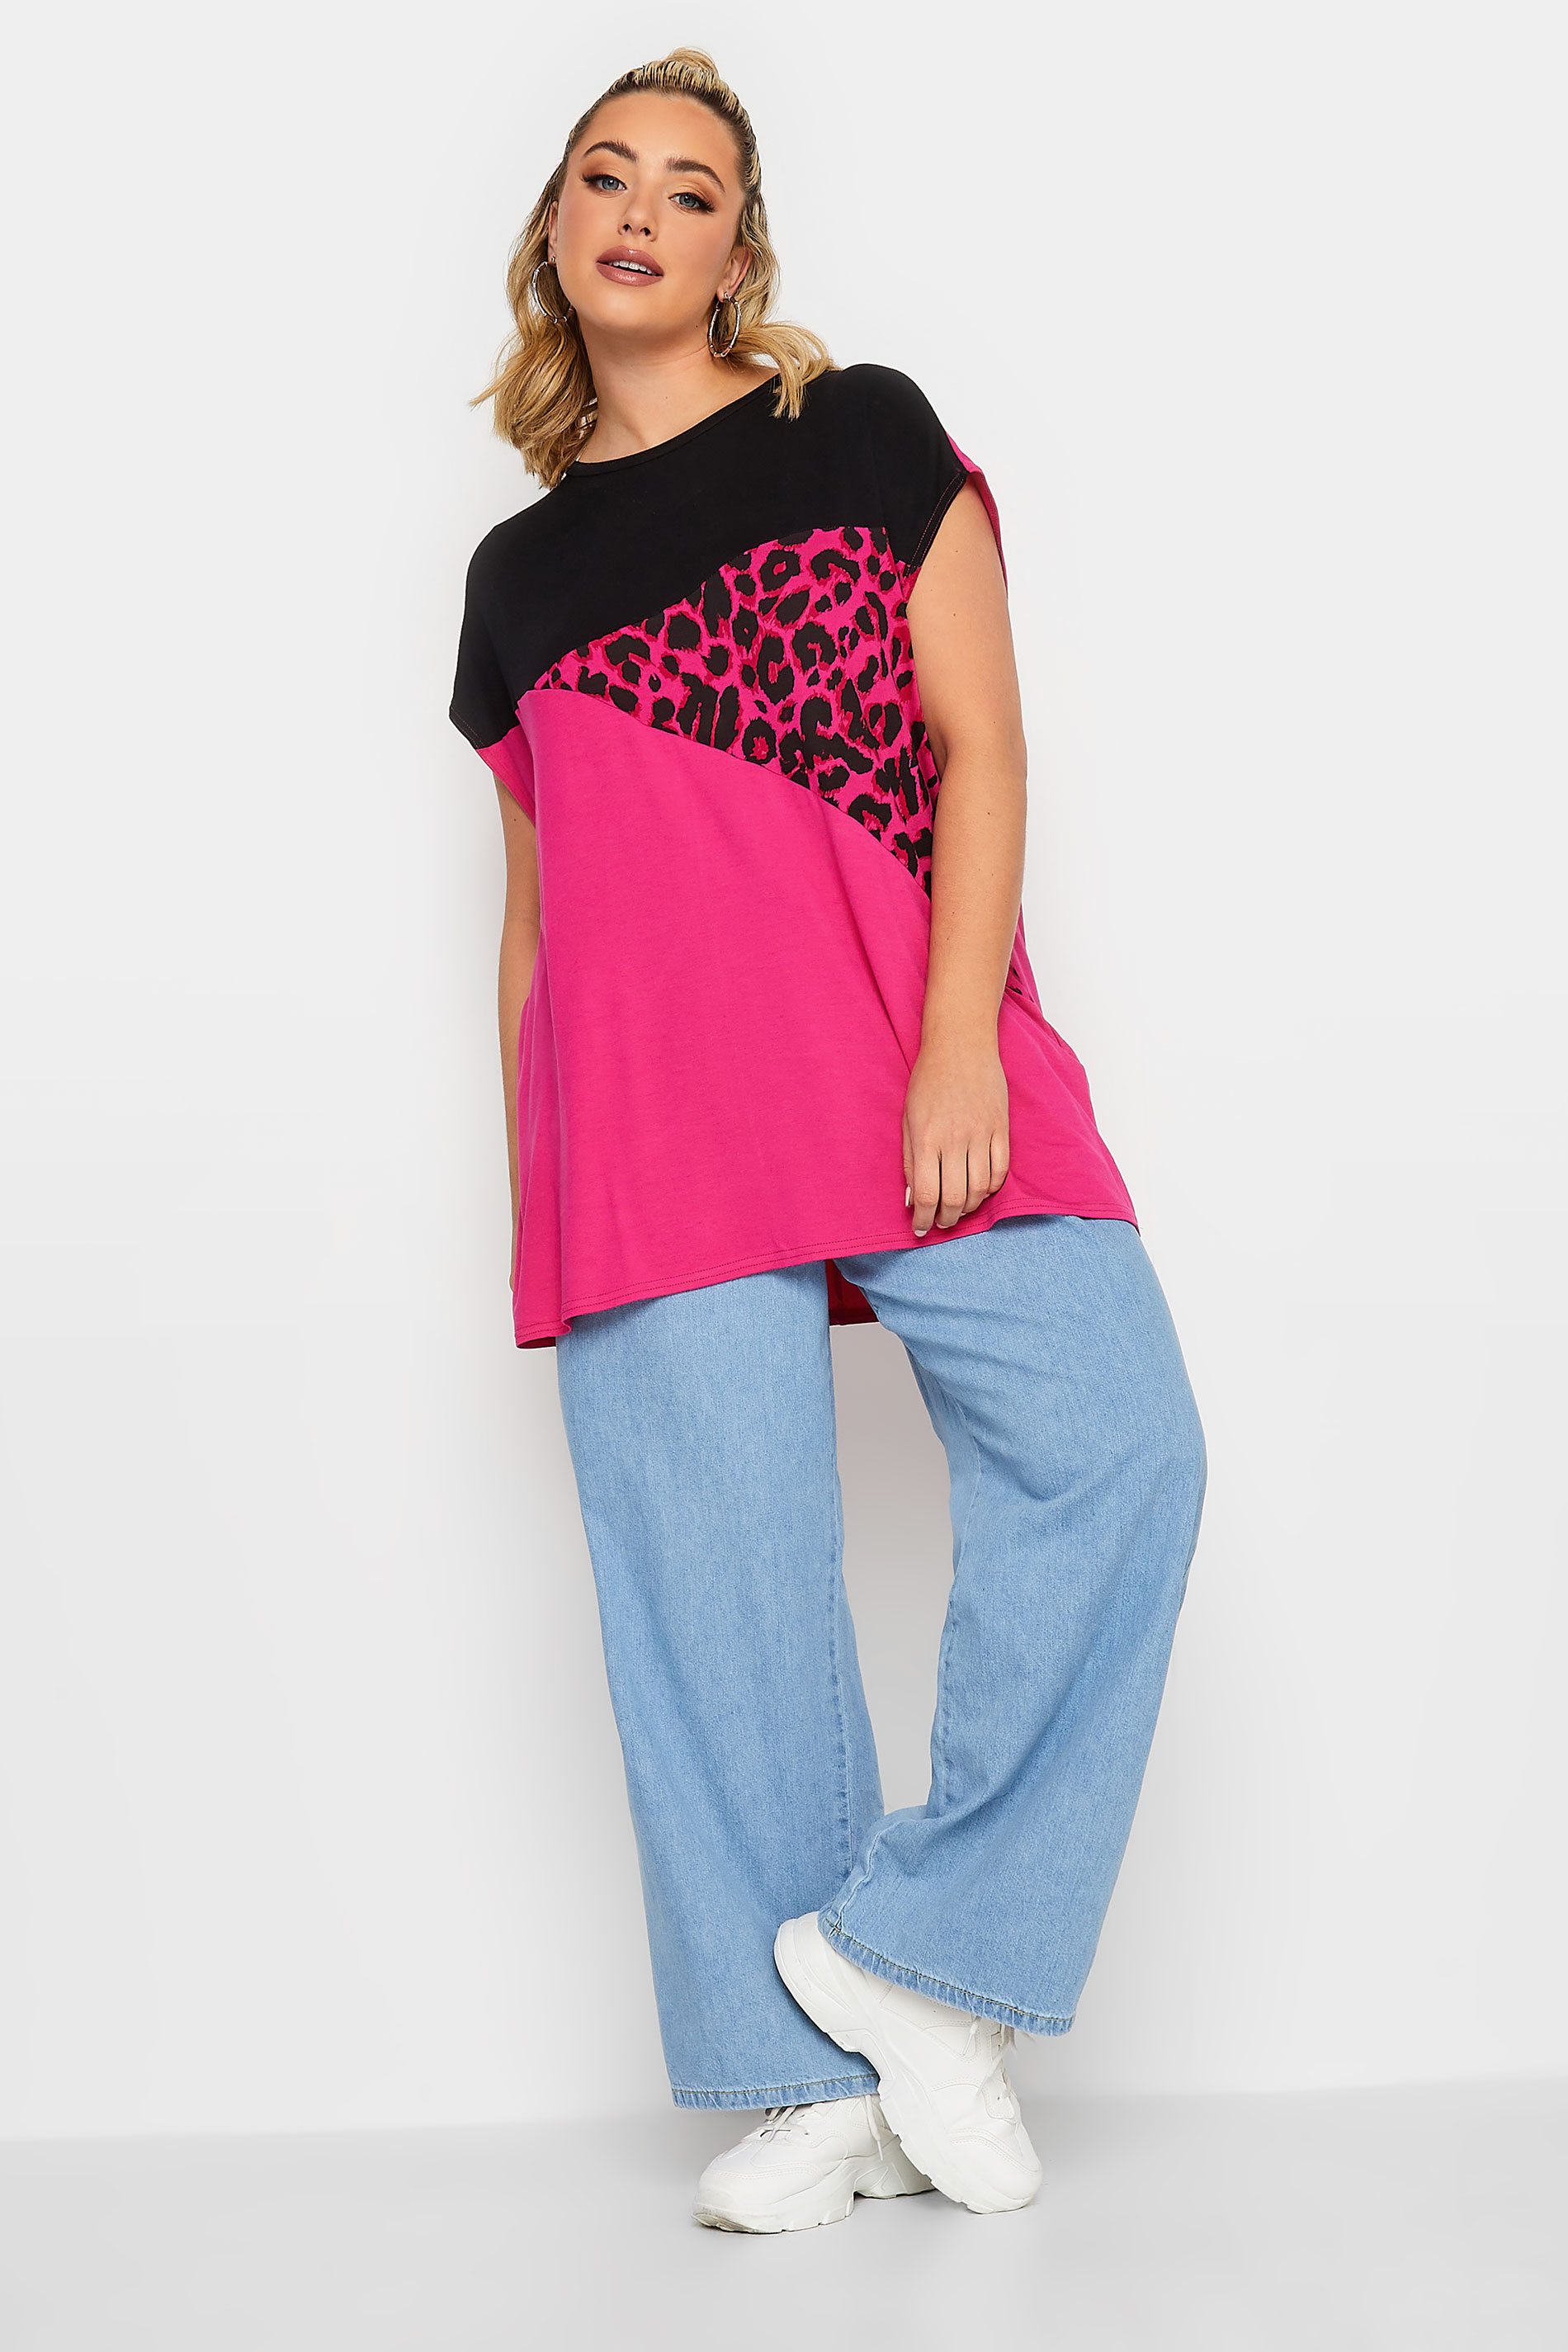 LIMITED COLLECTION Plus Size Hot Pink Leopard Print Colour Block T-Shirt | Yours Clothing 3